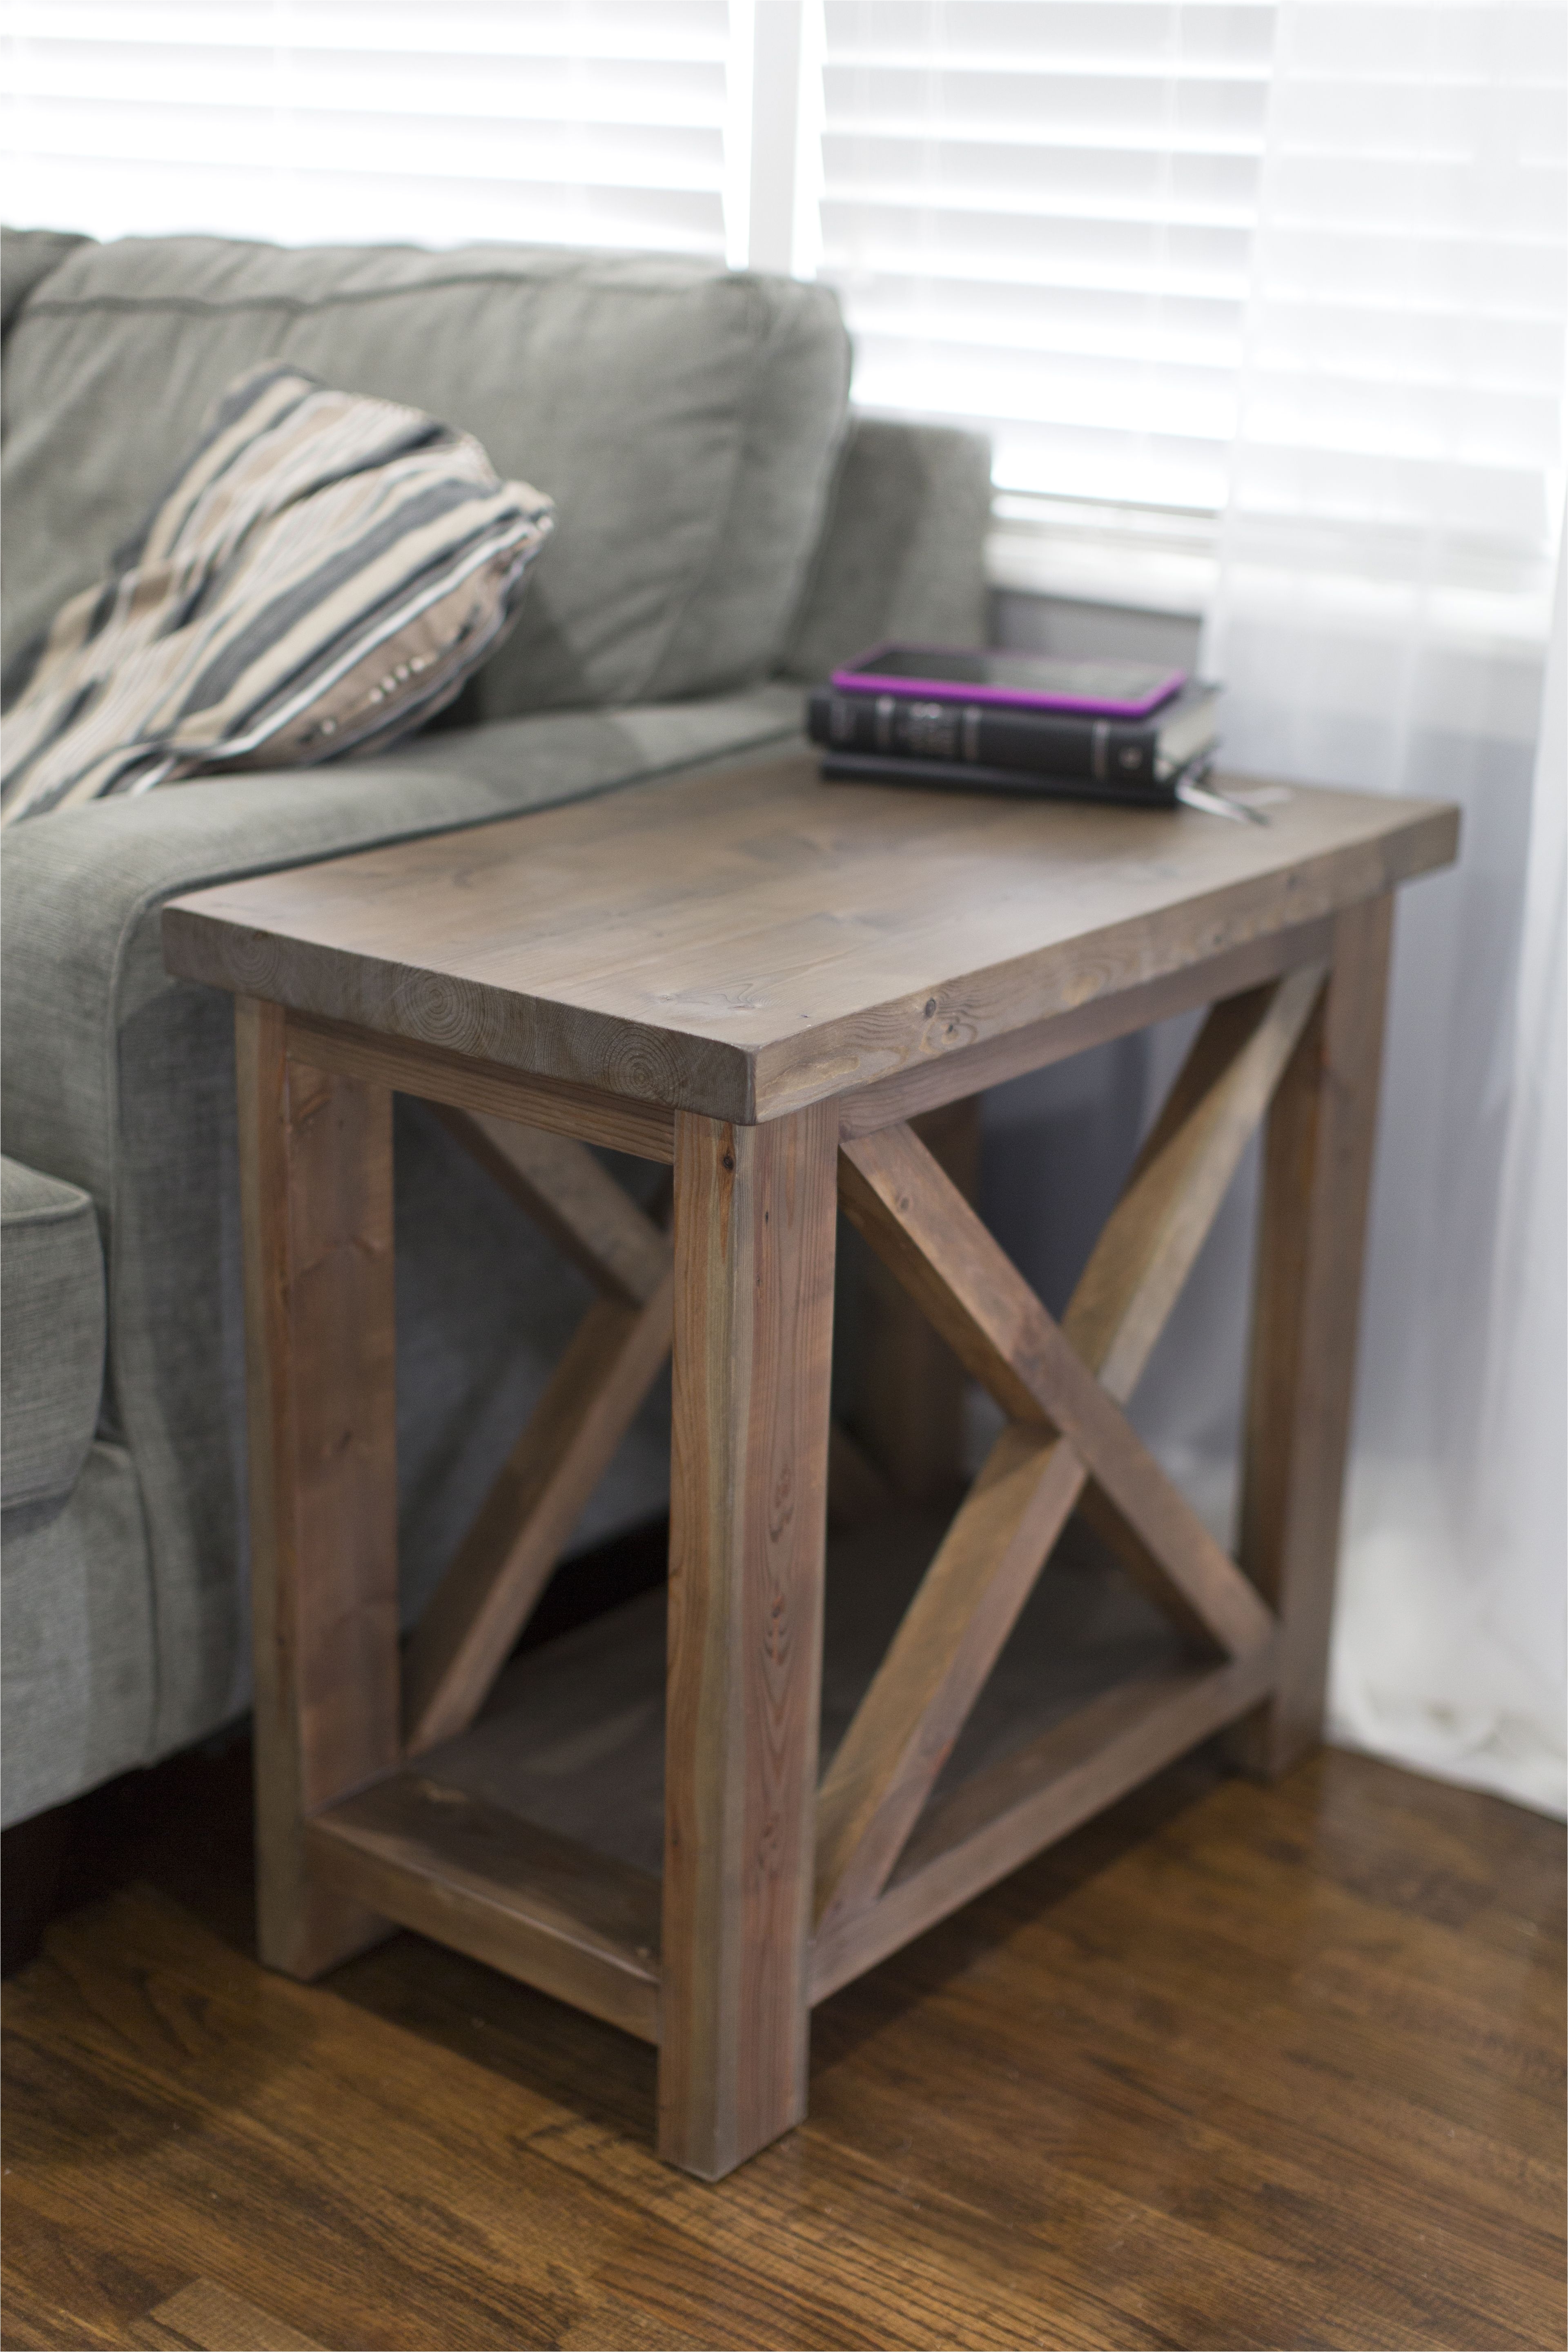 Rustic X style side table with a thick top and a bottom shelf for extra storage